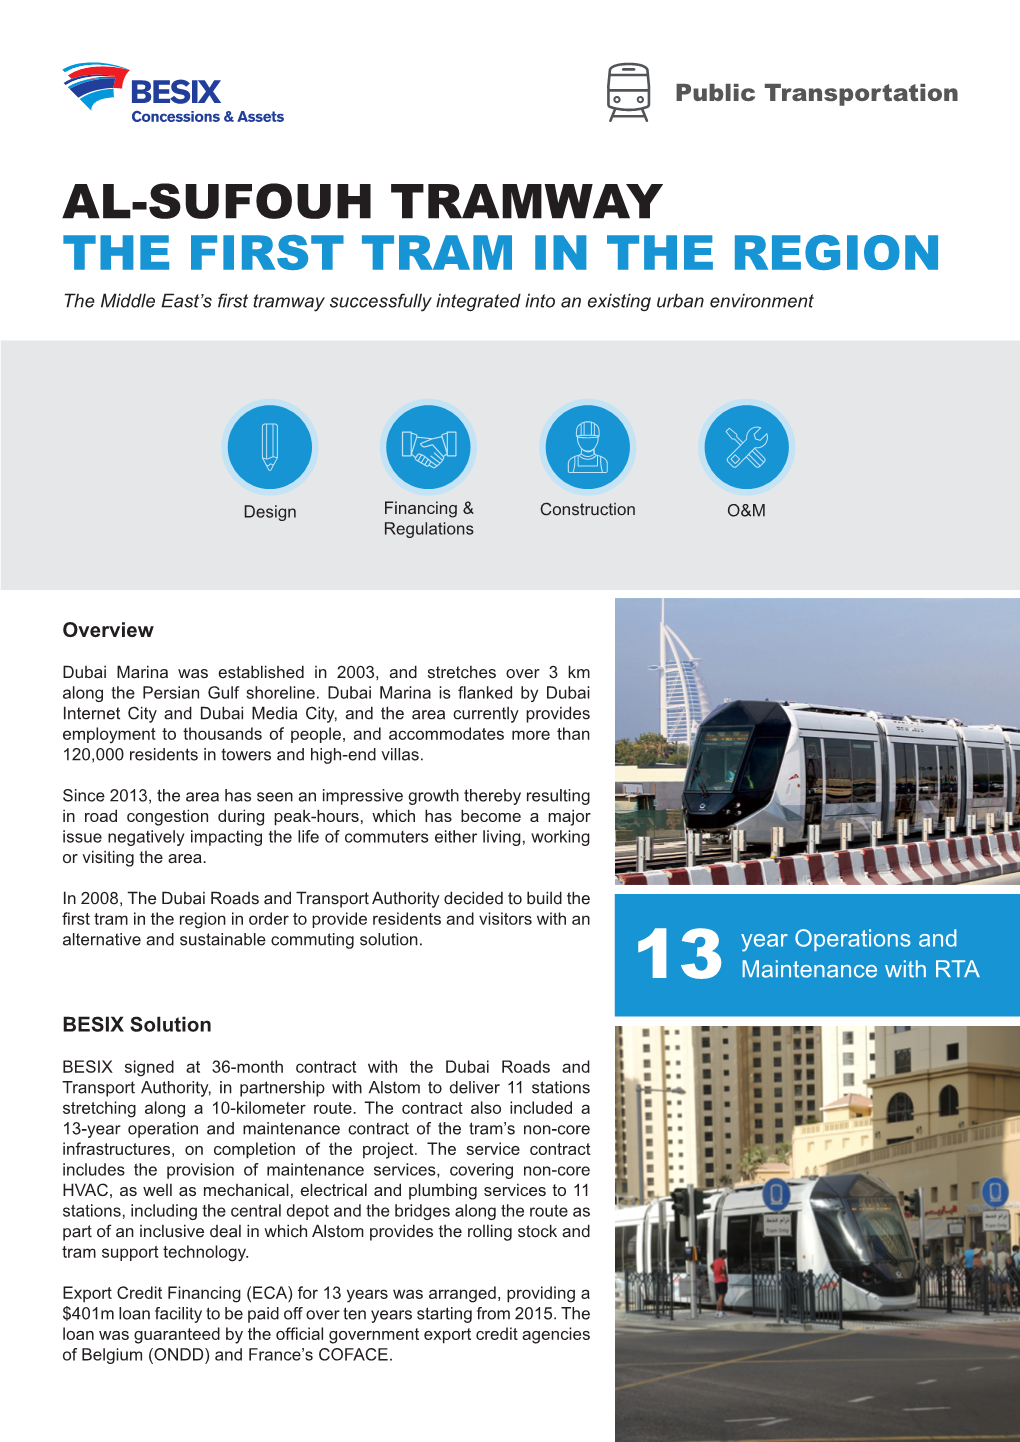 AL-SUFOUH TRAMWAY the FIRST TRAM in the REGION the Middle East’S First Tramway Successfully Integrated Into an Existing Urban Environment